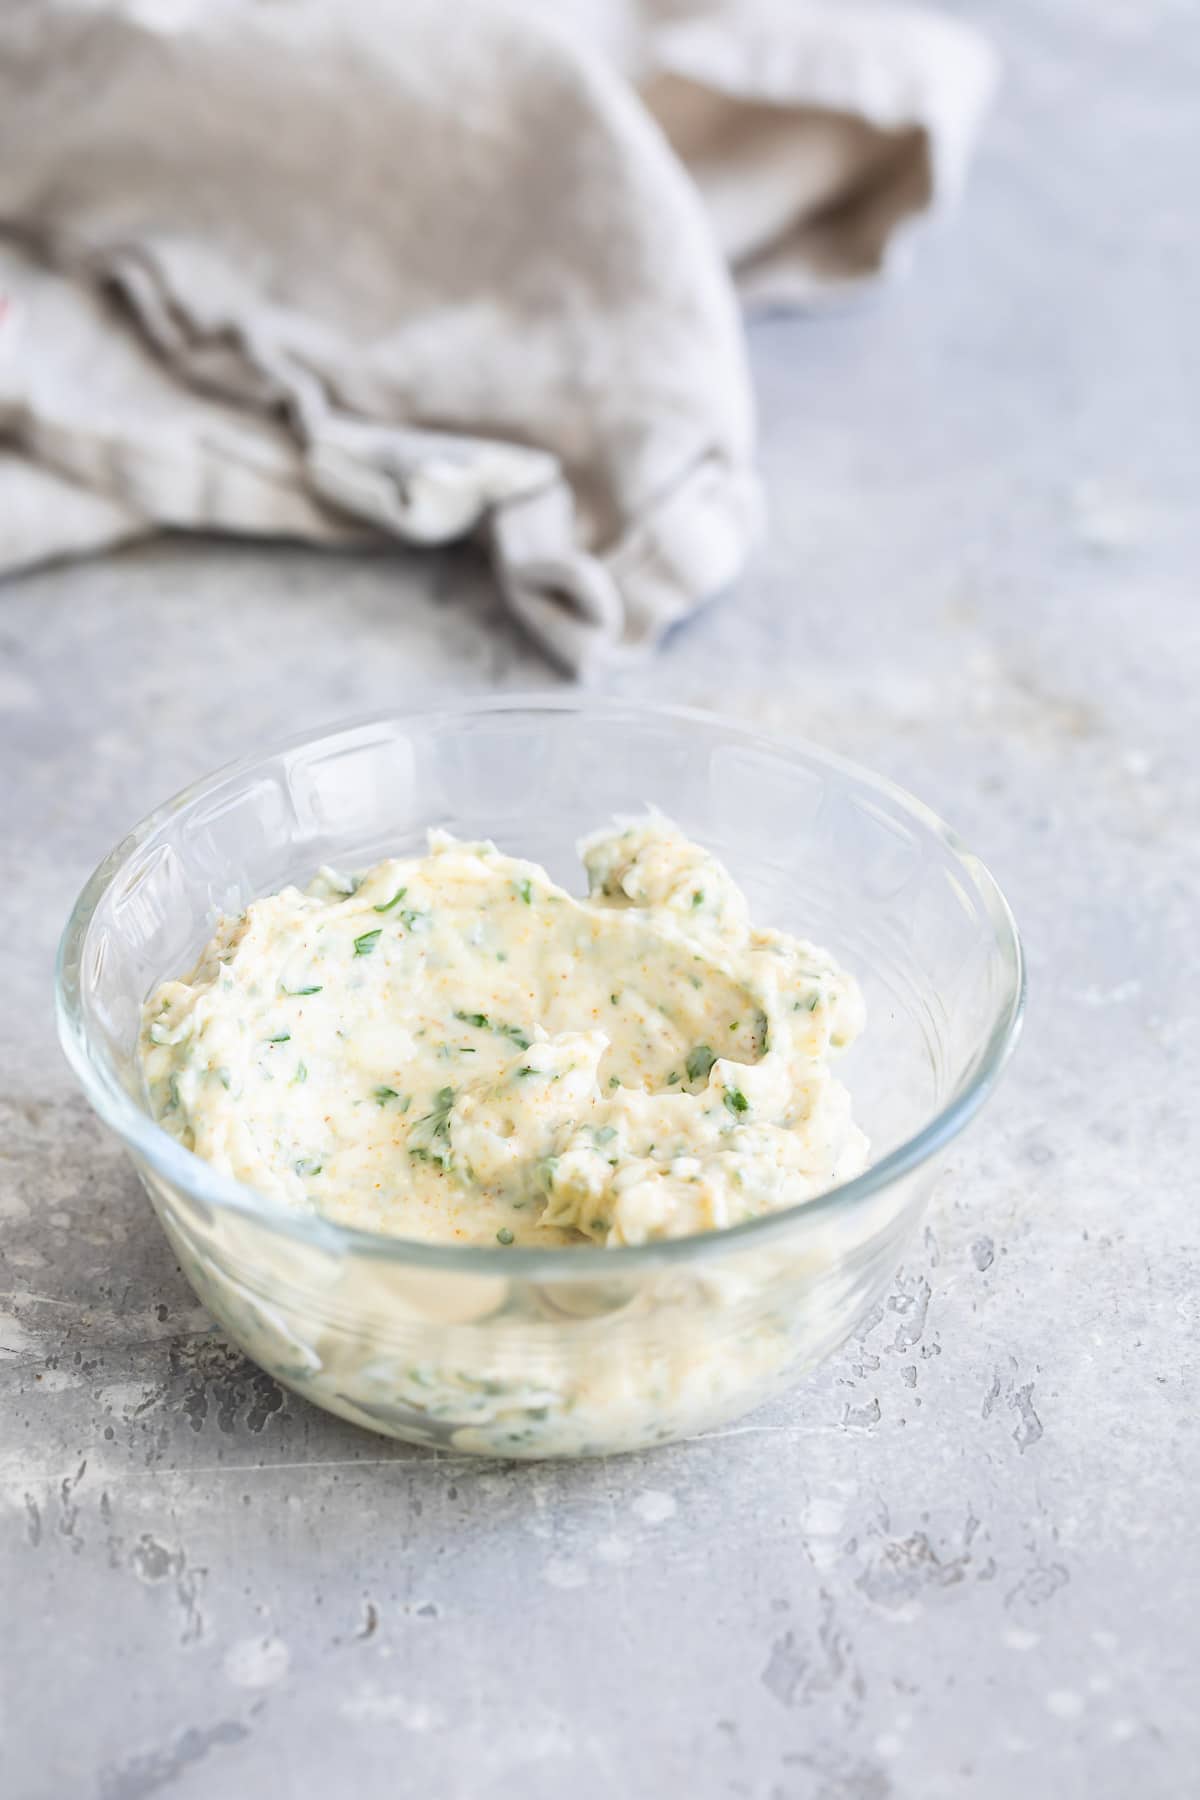 A clear bowl with some garlic spread in it.